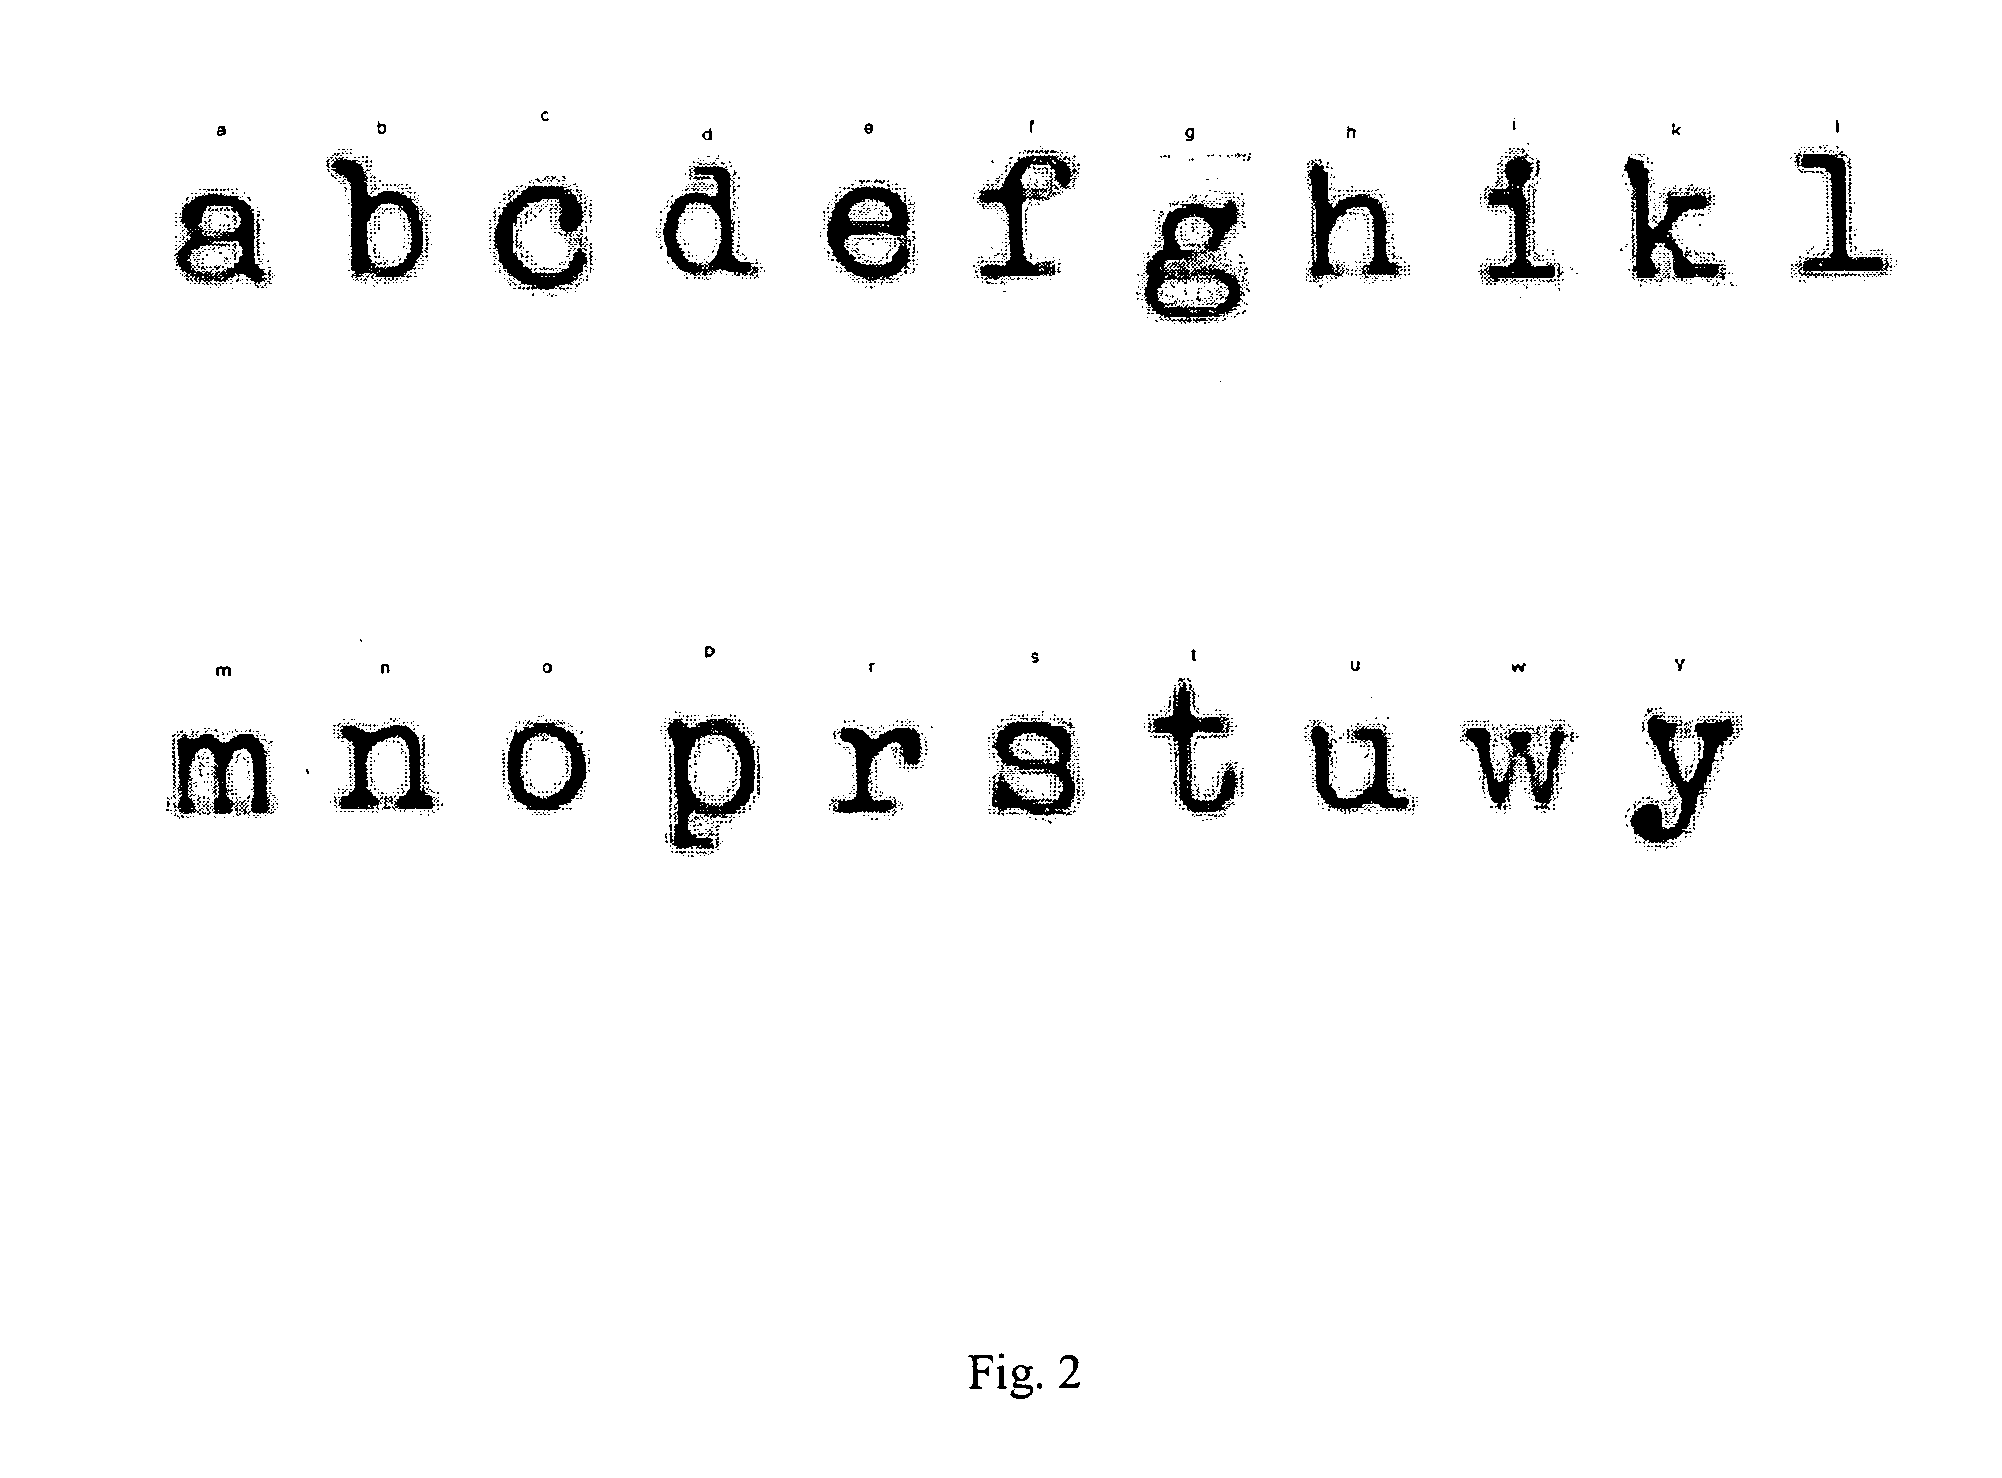 Method for processing optical character recognition (OCR) output data, wherein the output data comprises double printed character images